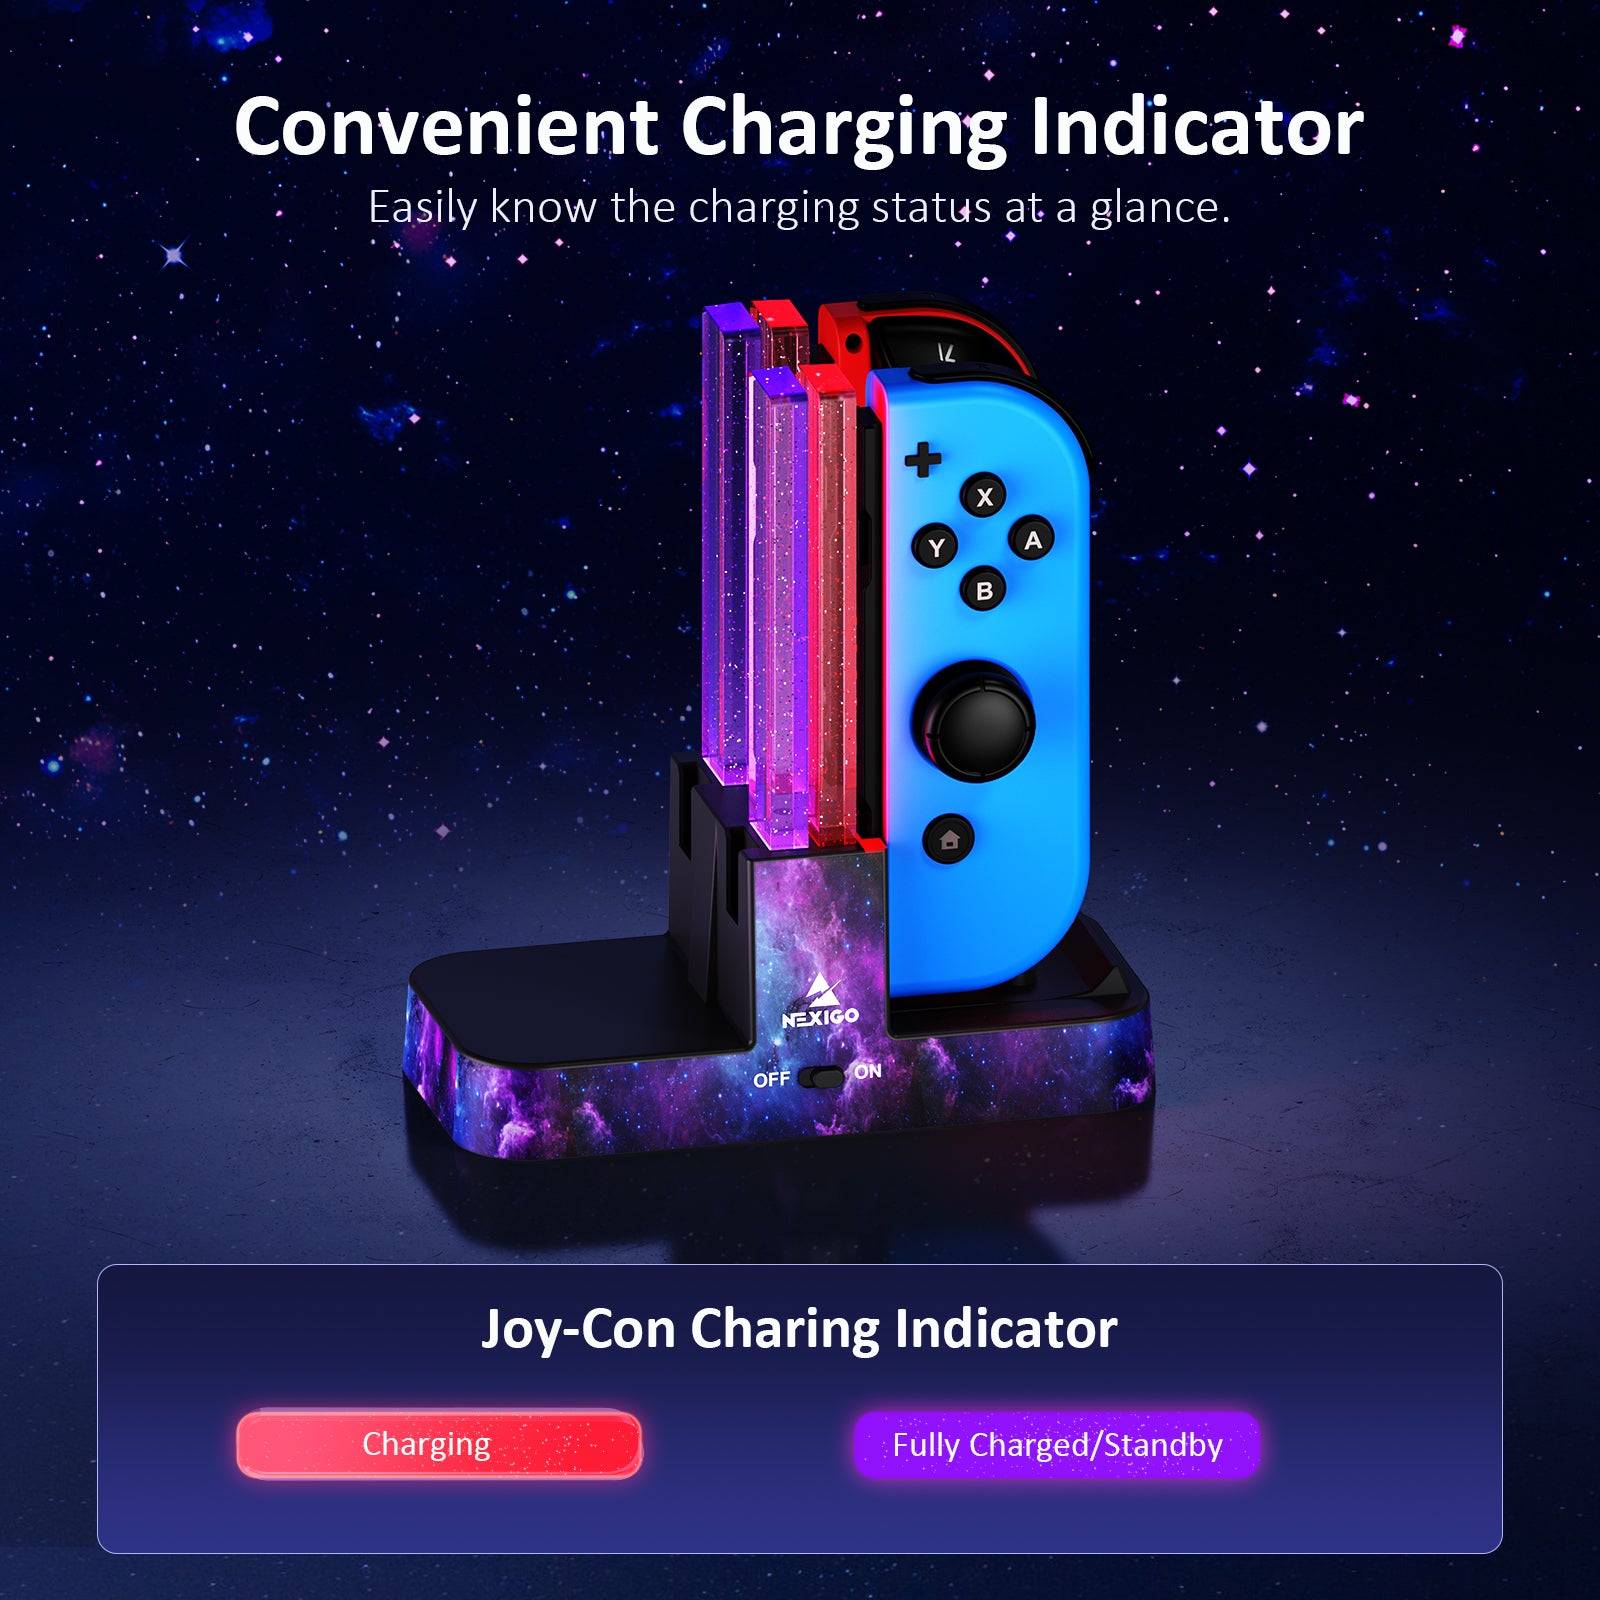 NexiGo Charging Dock: Red light for charging, purple for standby and fully charged.